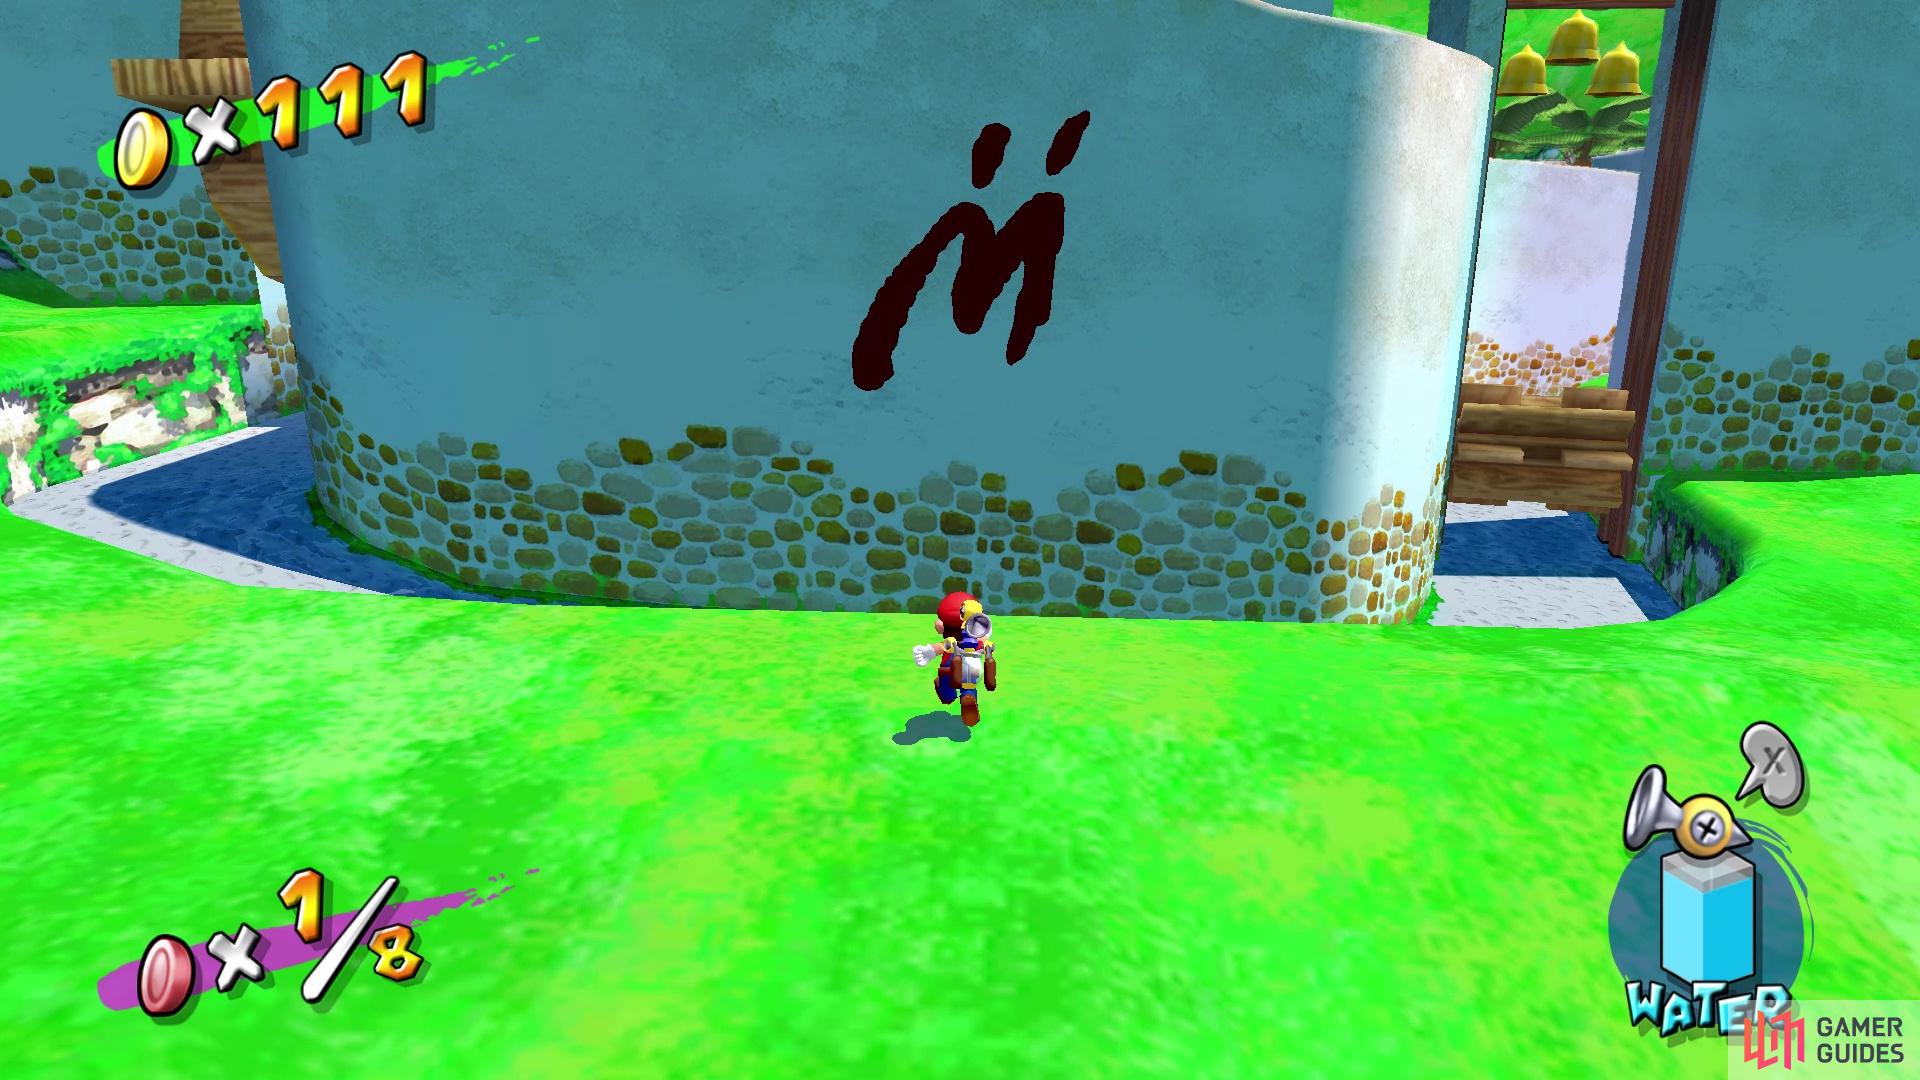 Clean this graffiti on the big wall to get Blue Coin #13